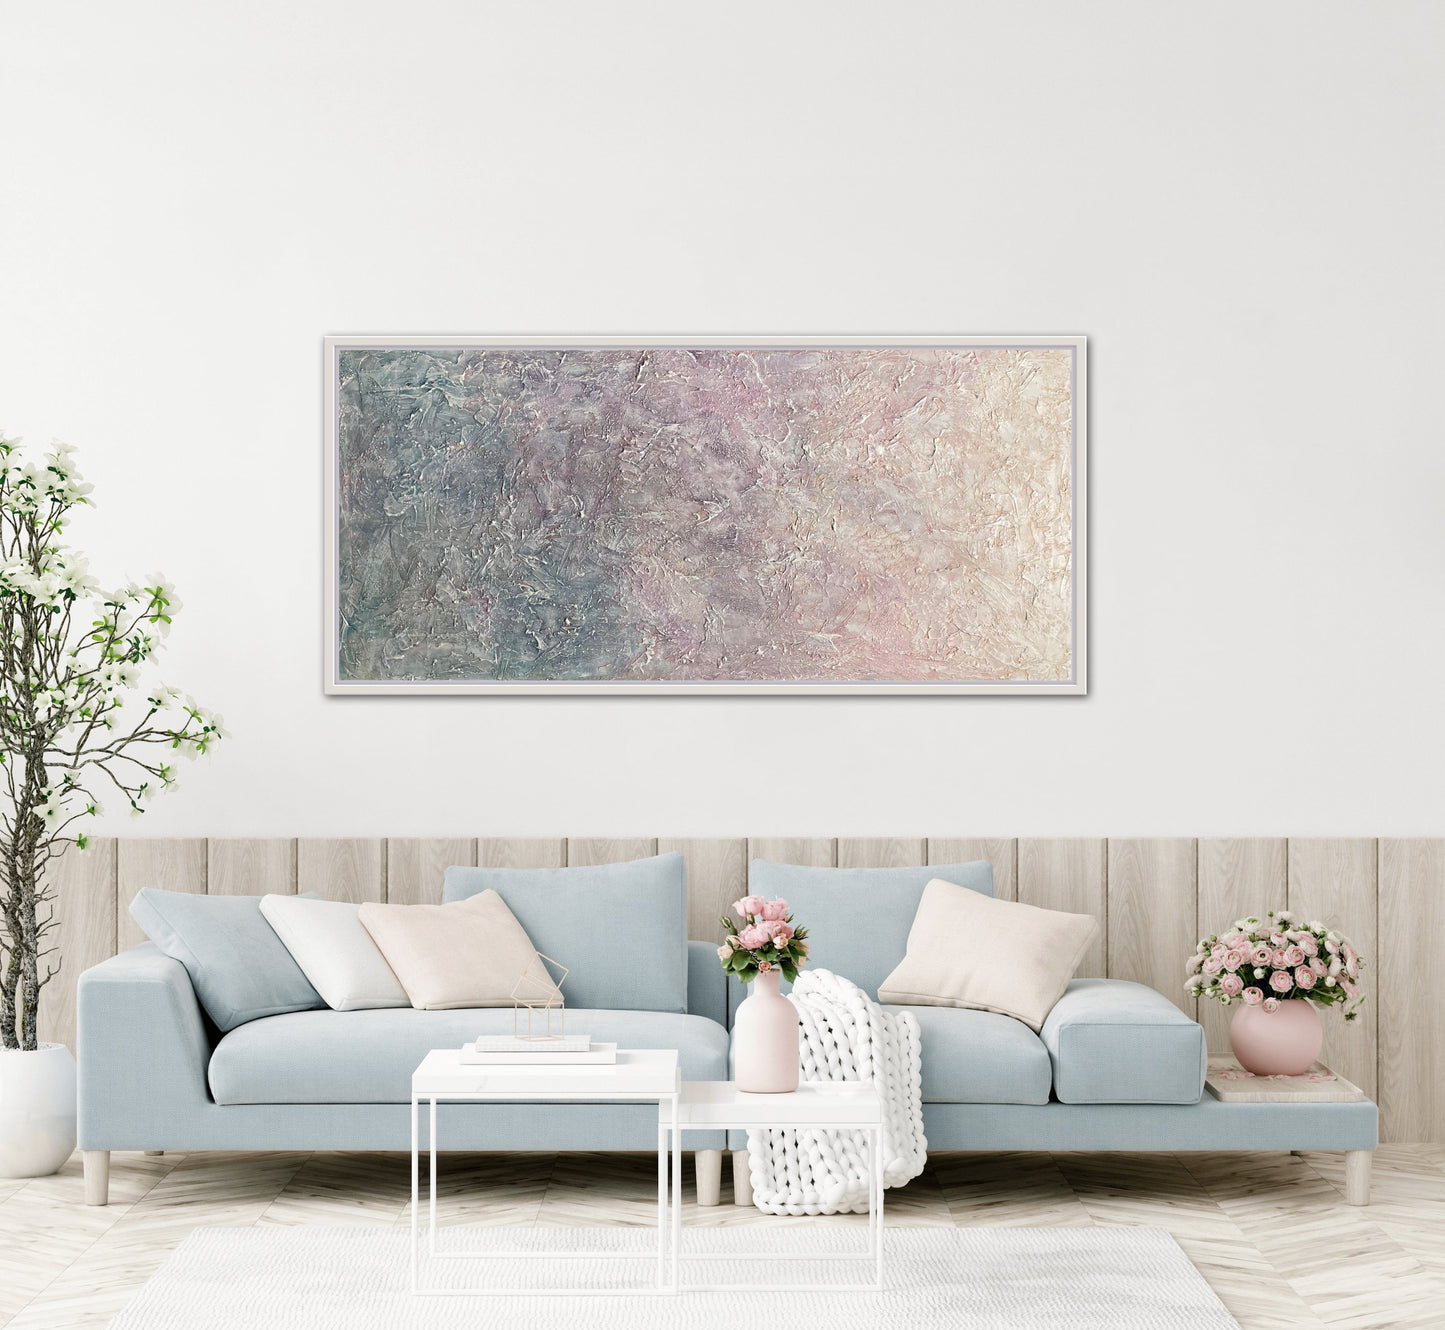 Ombre pink, purple, blue, yellow and white textured abstract art.Large Abstract Textured Colourful Ombre Painting: Blissful Path - Ashley Alexandra